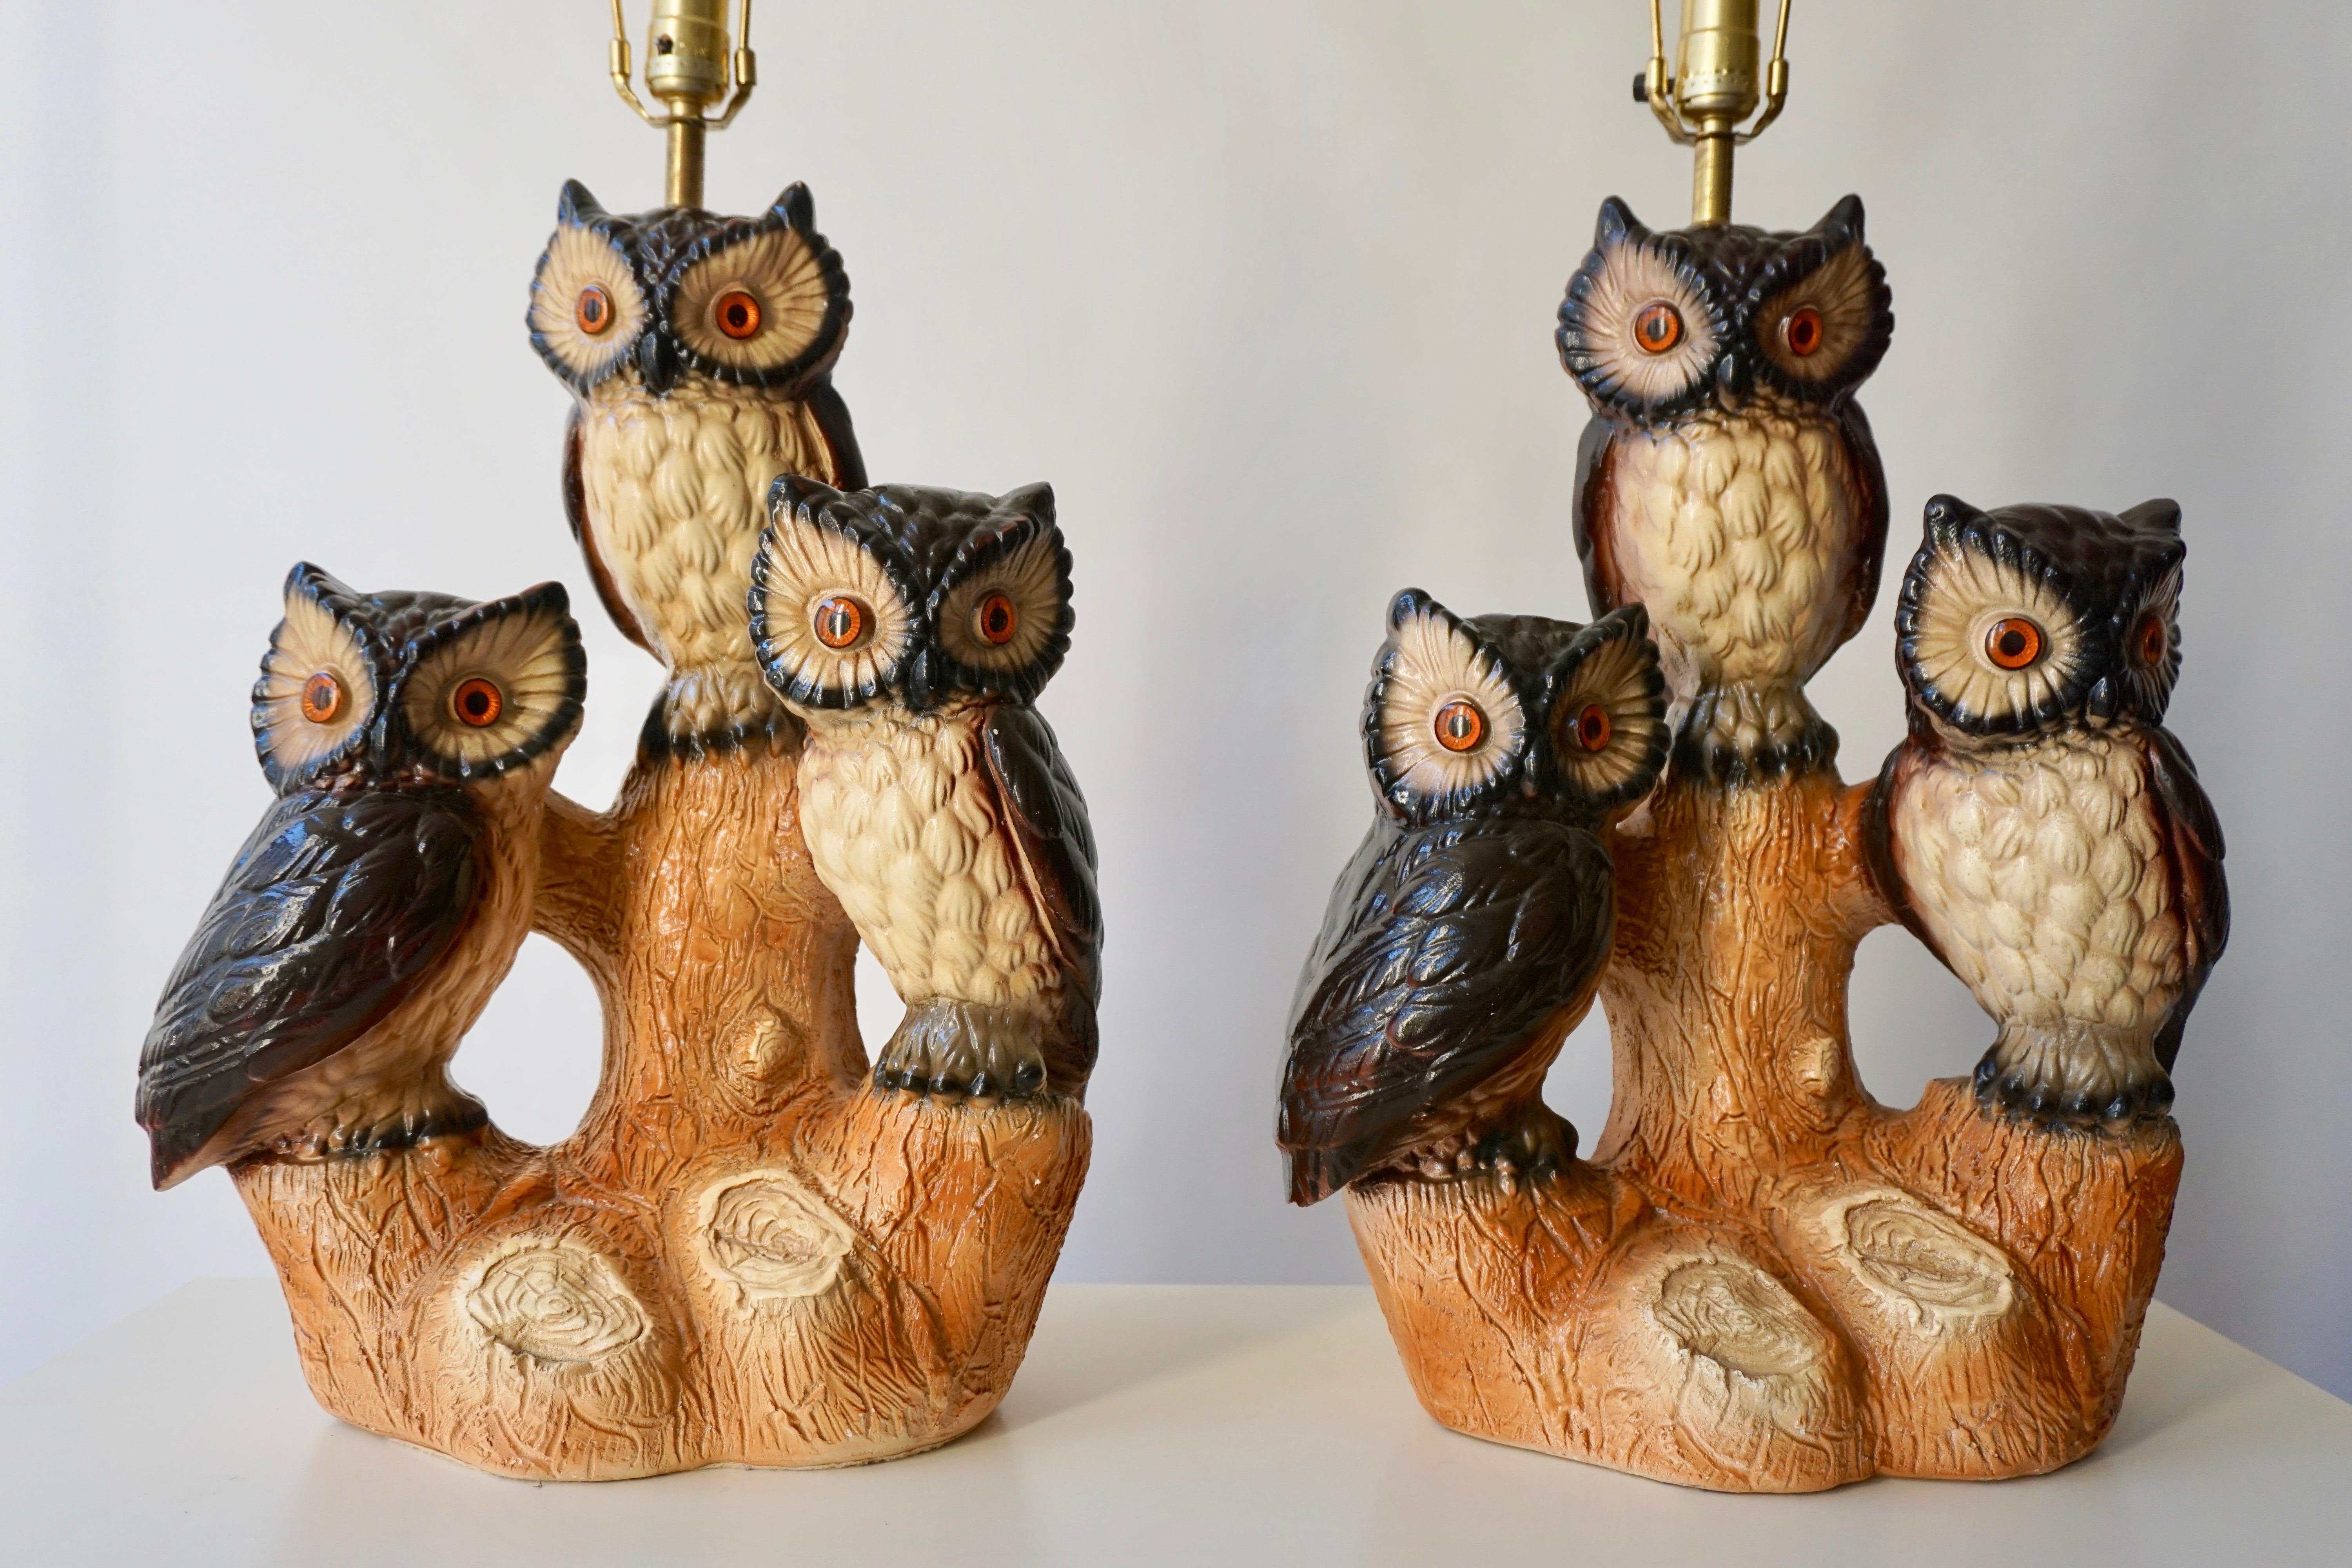 Brass Mid-Century Modern Sculptural Ceramic Owl Lamps, 1970s For Sale